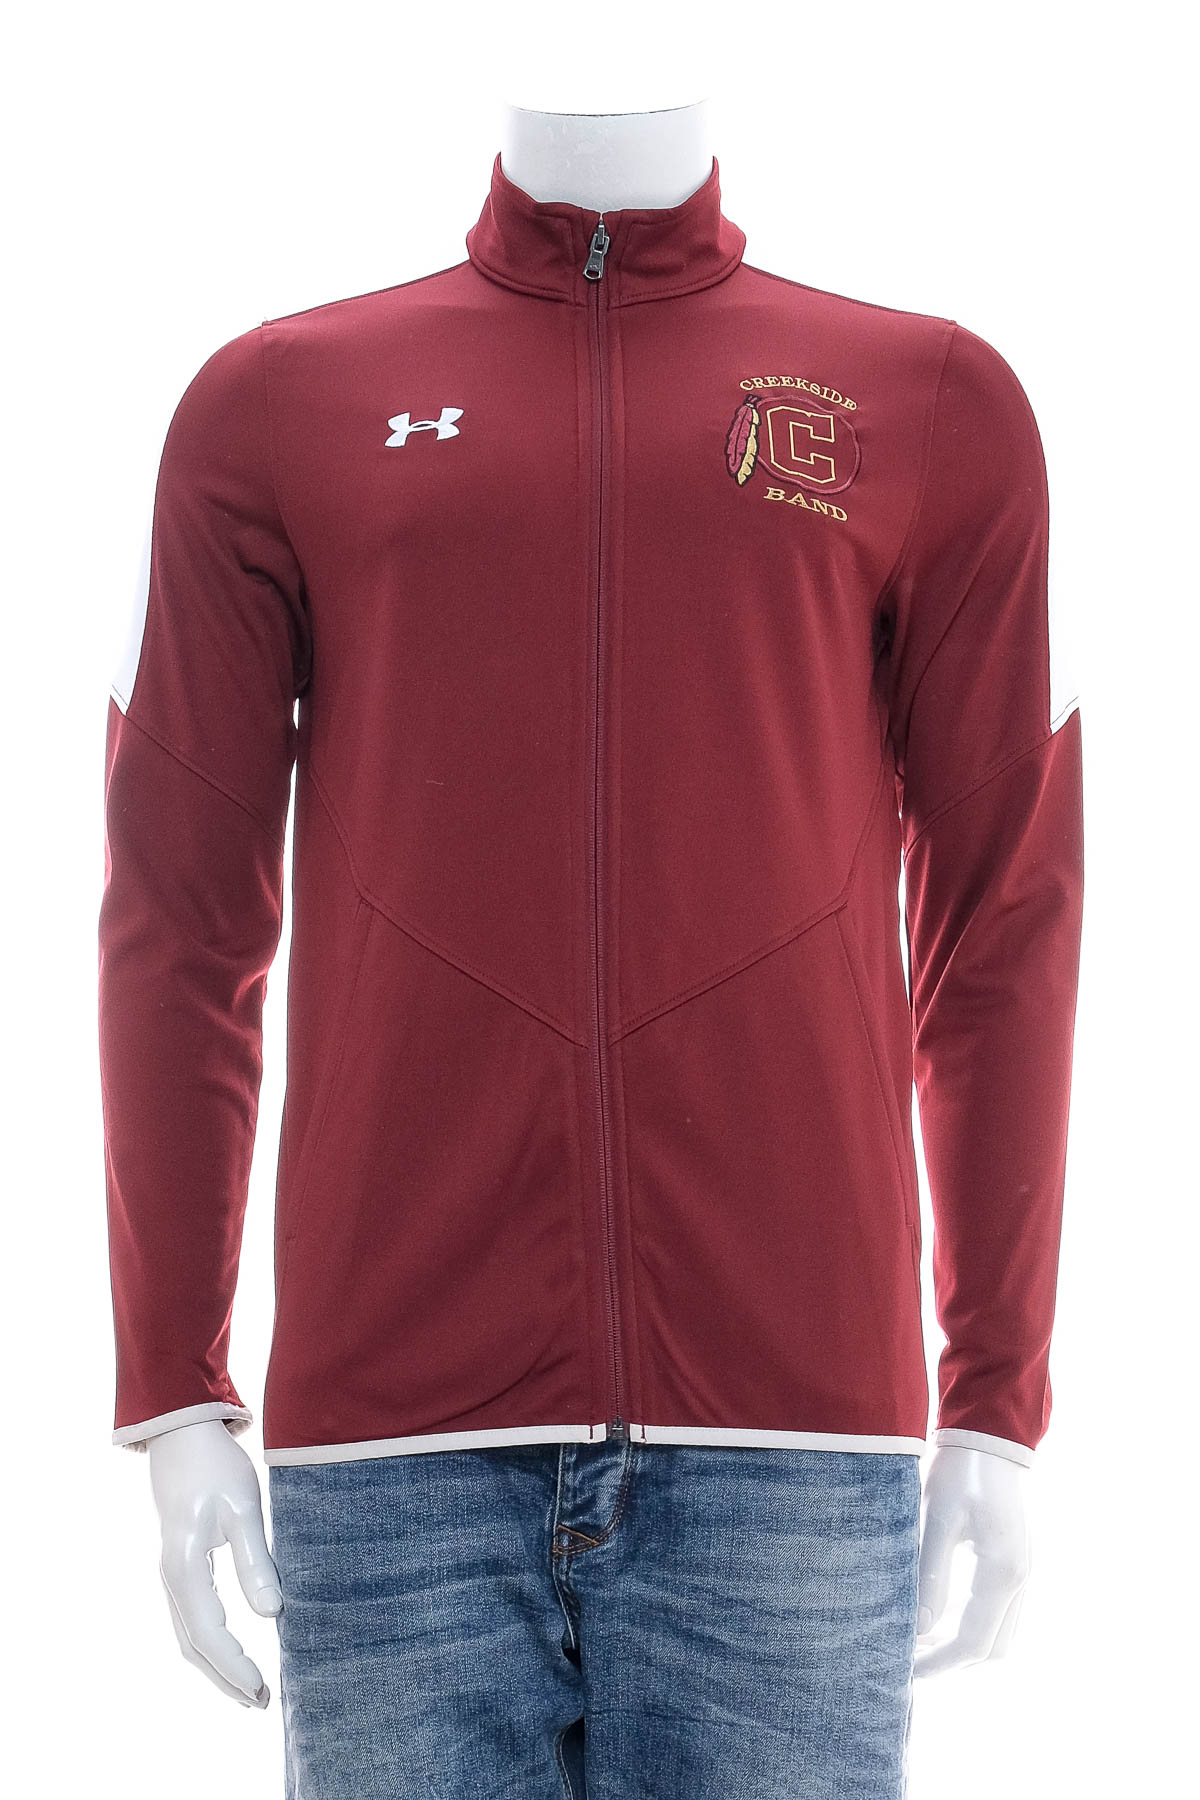 Male sports top - UNDER ARMOUR - 0